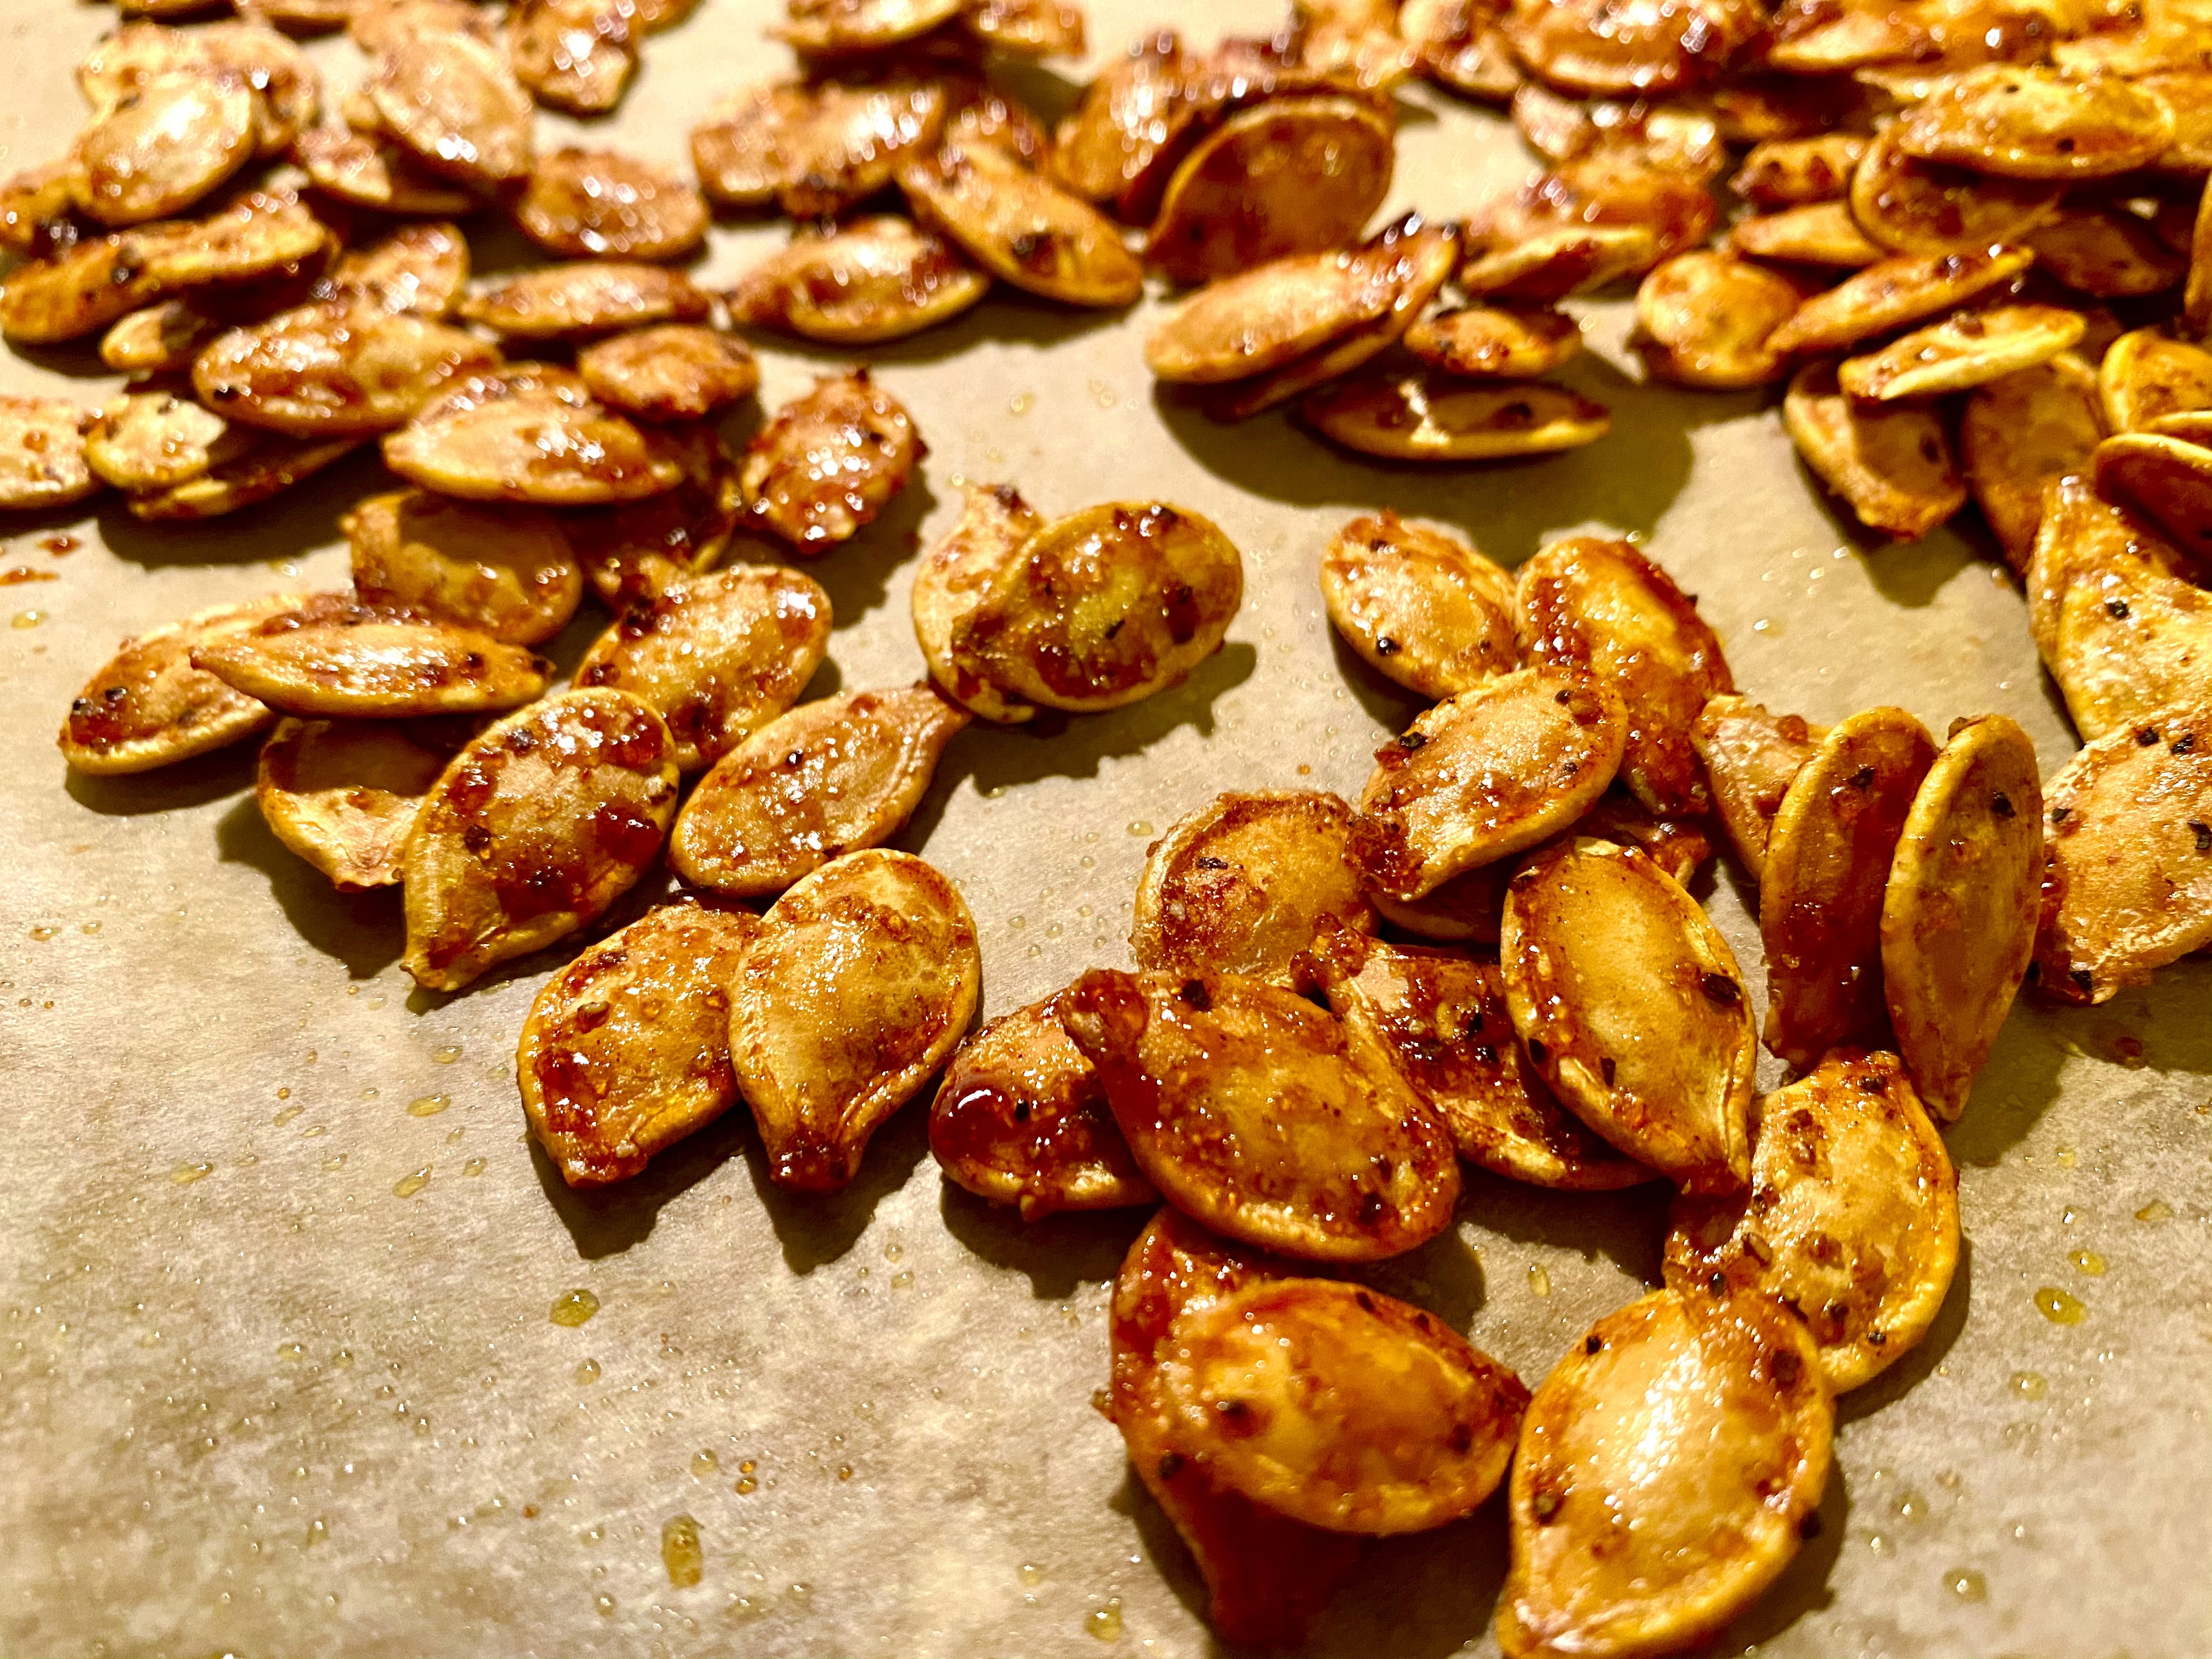 The Day After Halloween: Sweet & Spicy Pumpkin Seeds